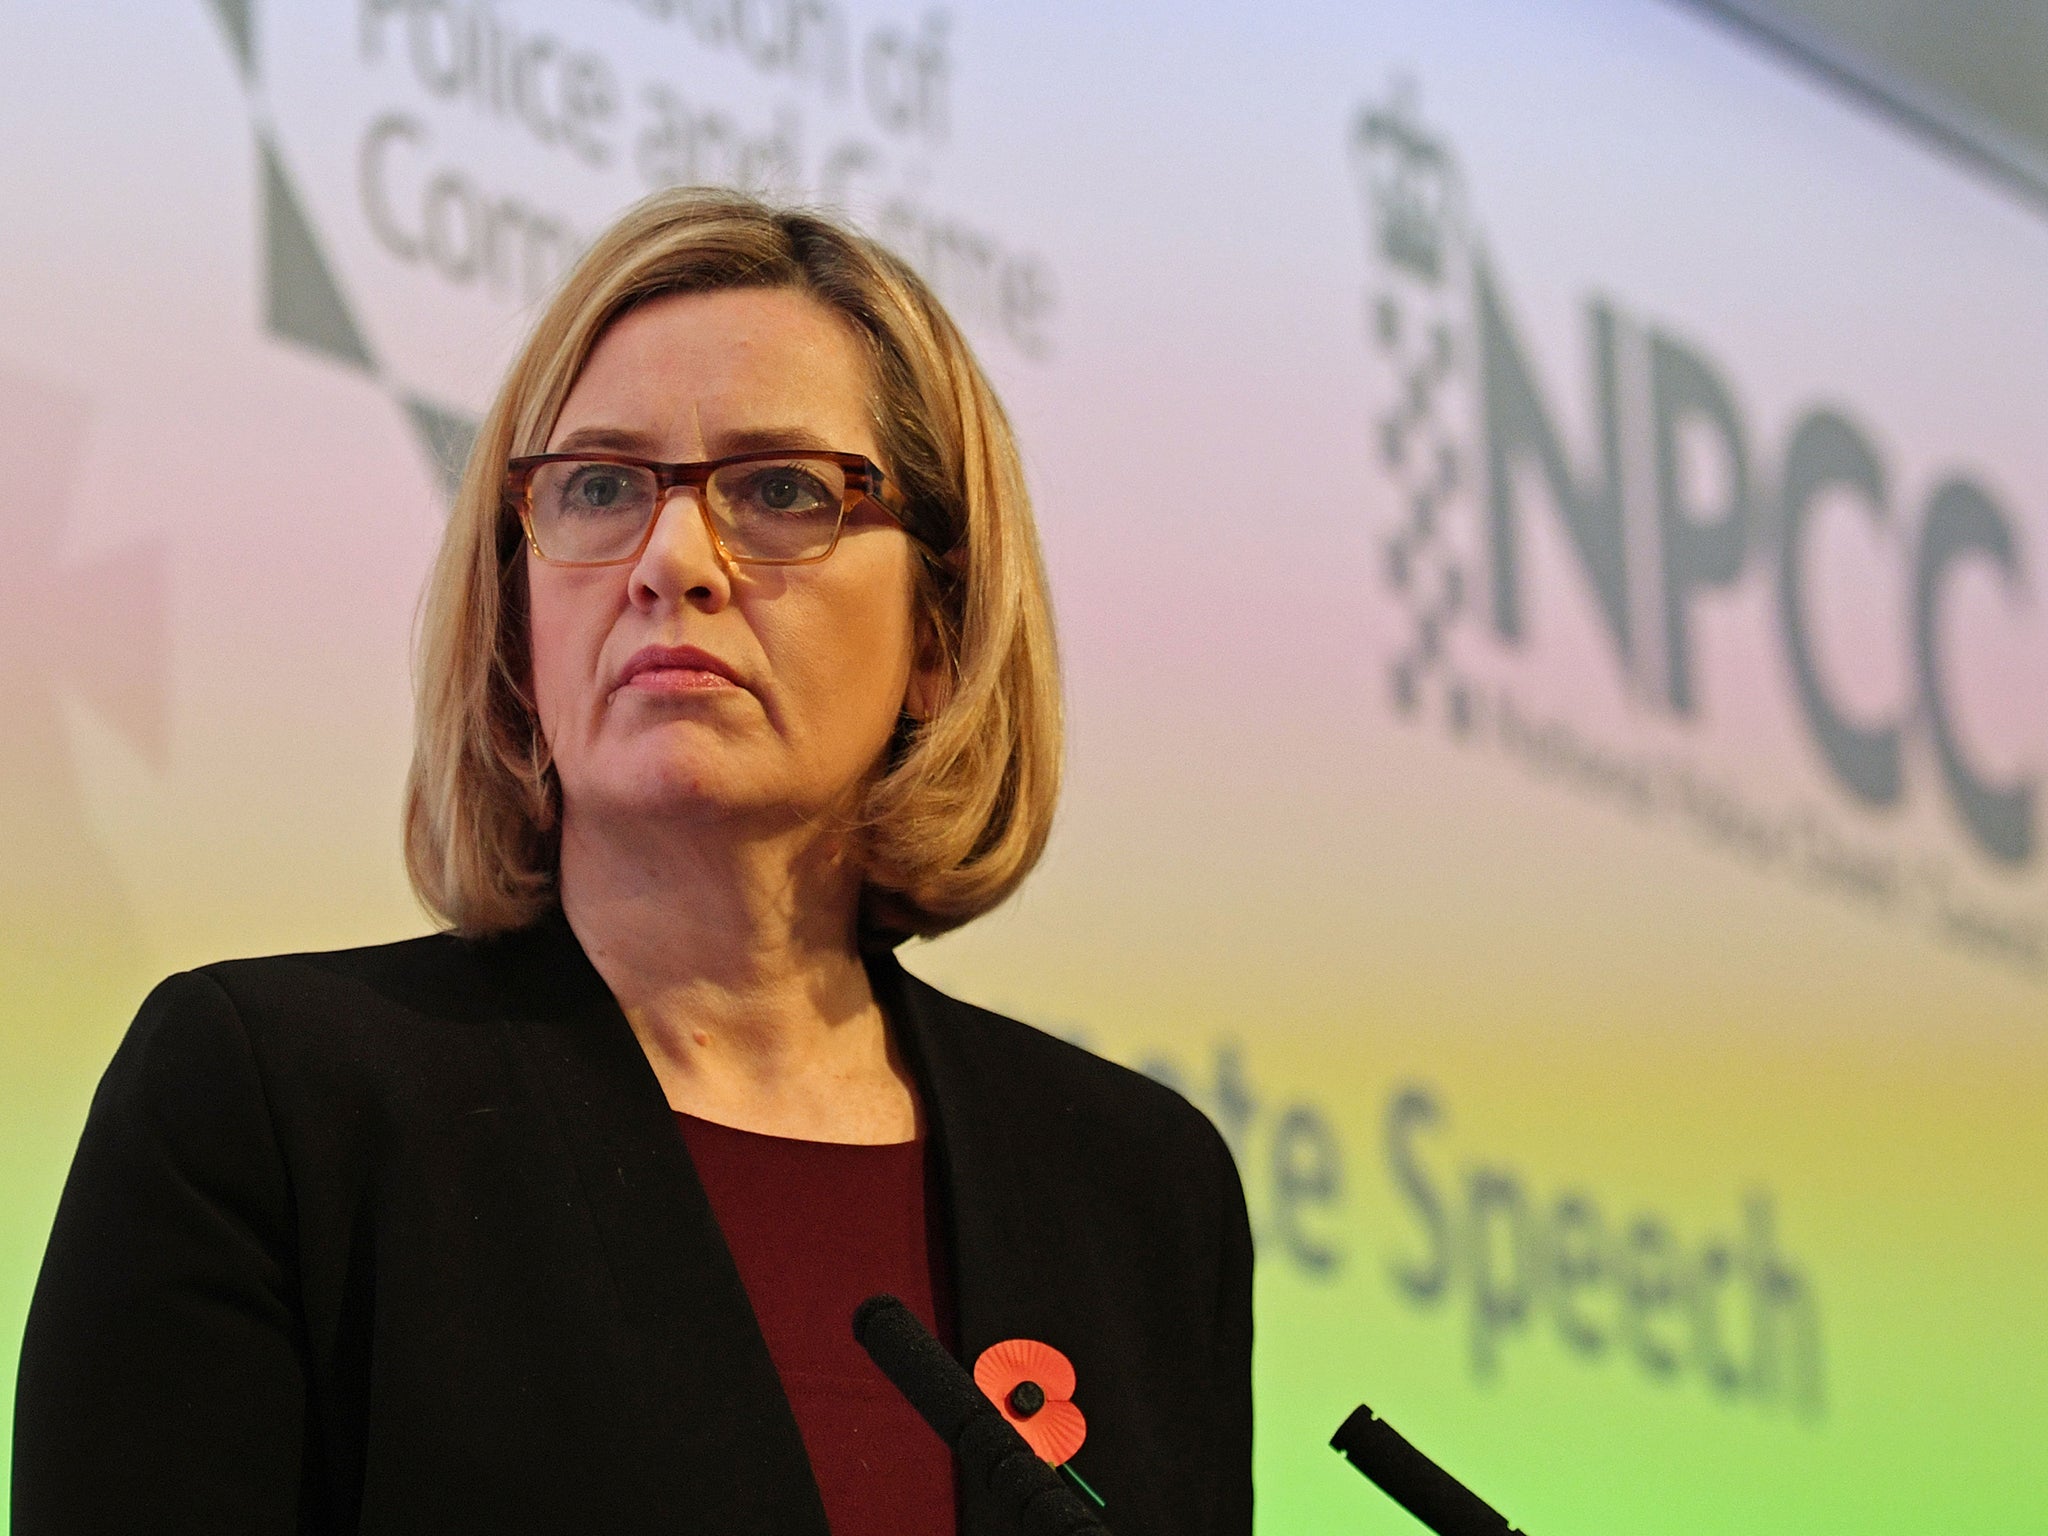 Home Secretary Amber Rudd addresses the National Police Chiefs and Association of Police and Crime Commissioners Conference